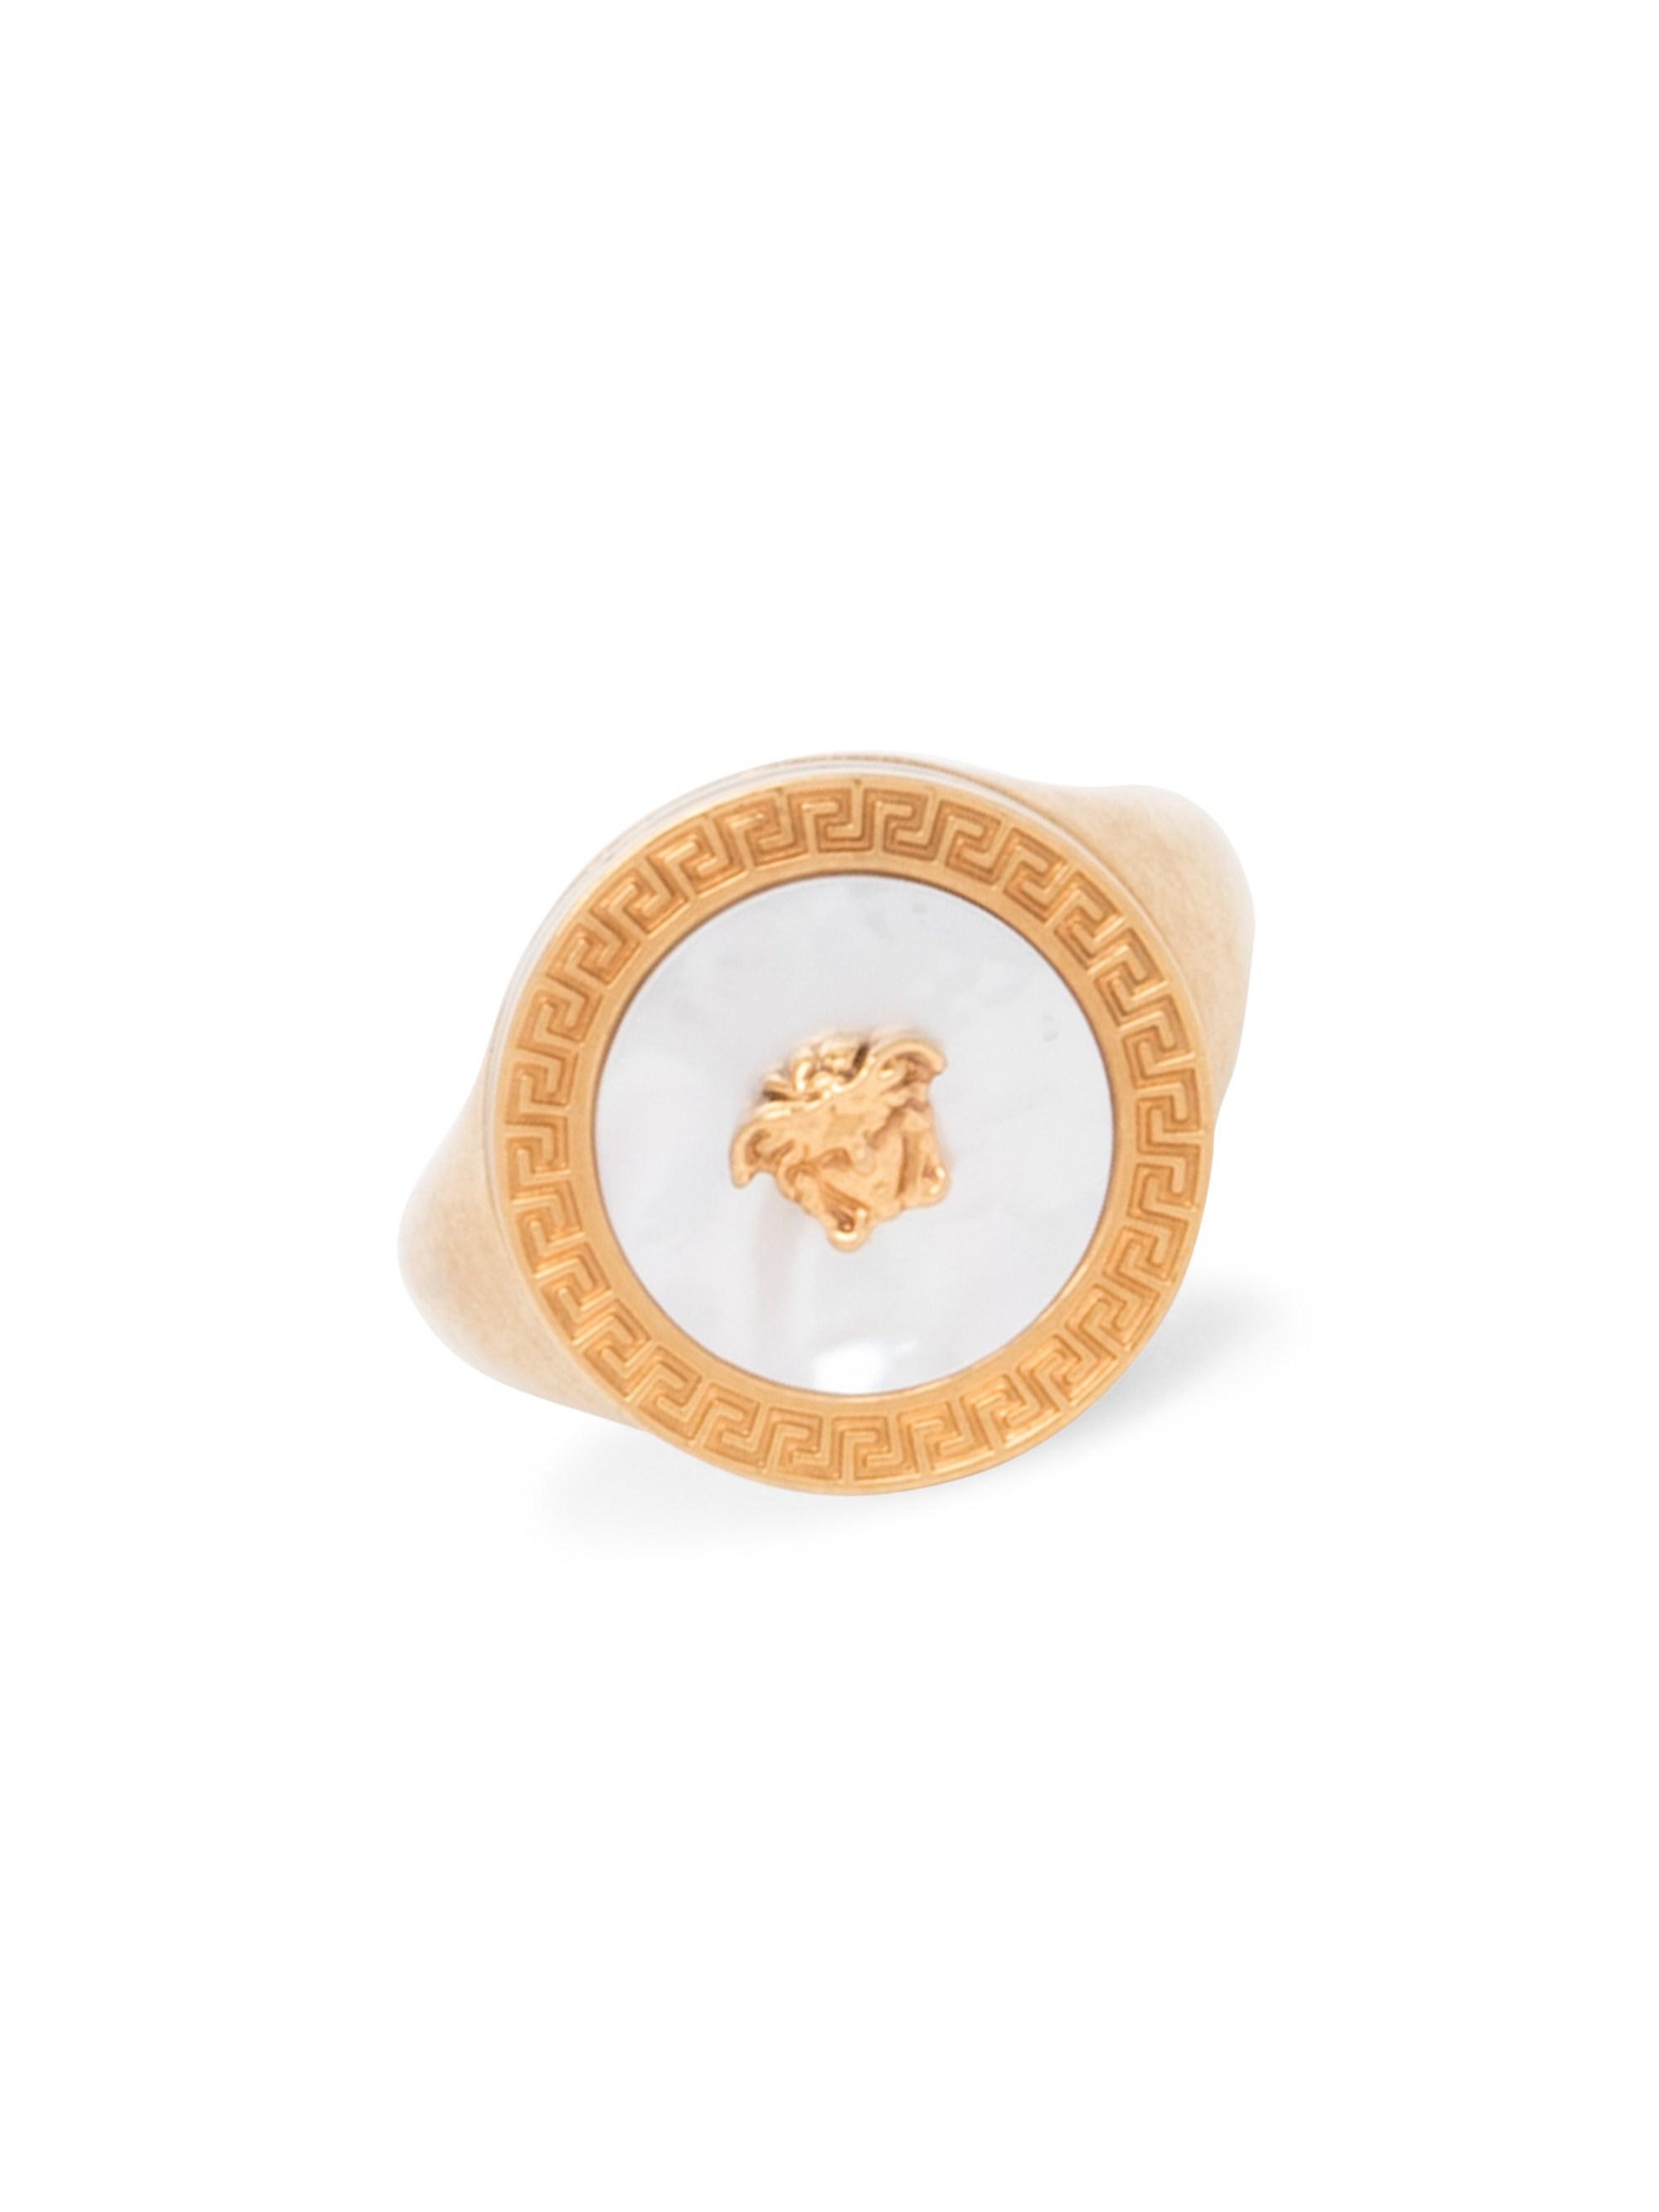 mother of pearl medusa ring